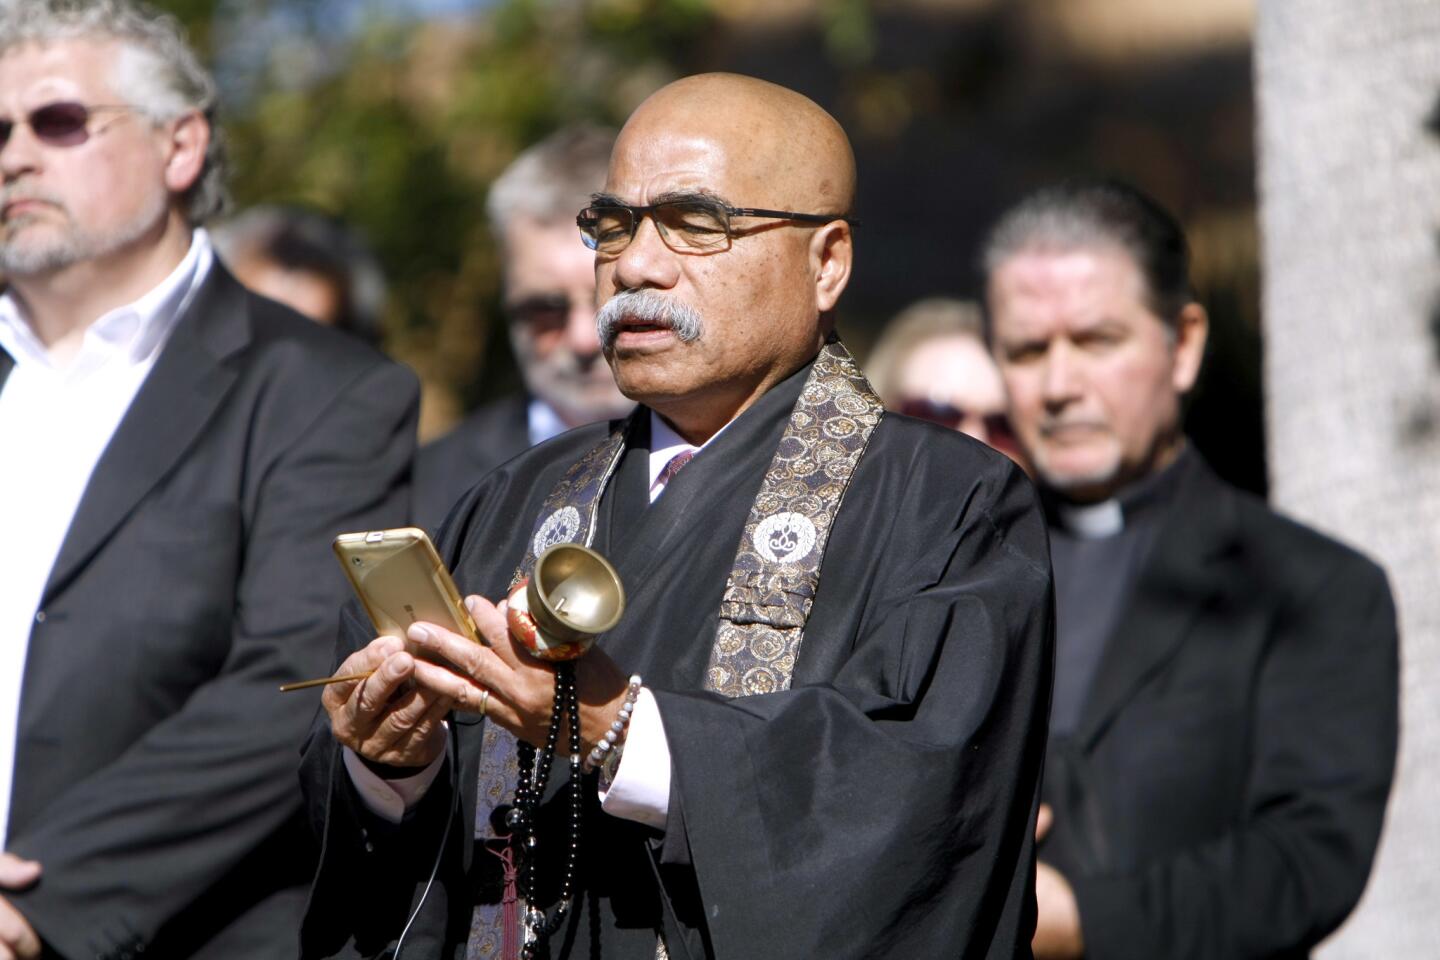 Photo Gallery: Los Angeles County Annual Burial of the Unclaimed Dead nondenominational, interfaith ceremony held at L.A. County Cemetery in Boyle Heights